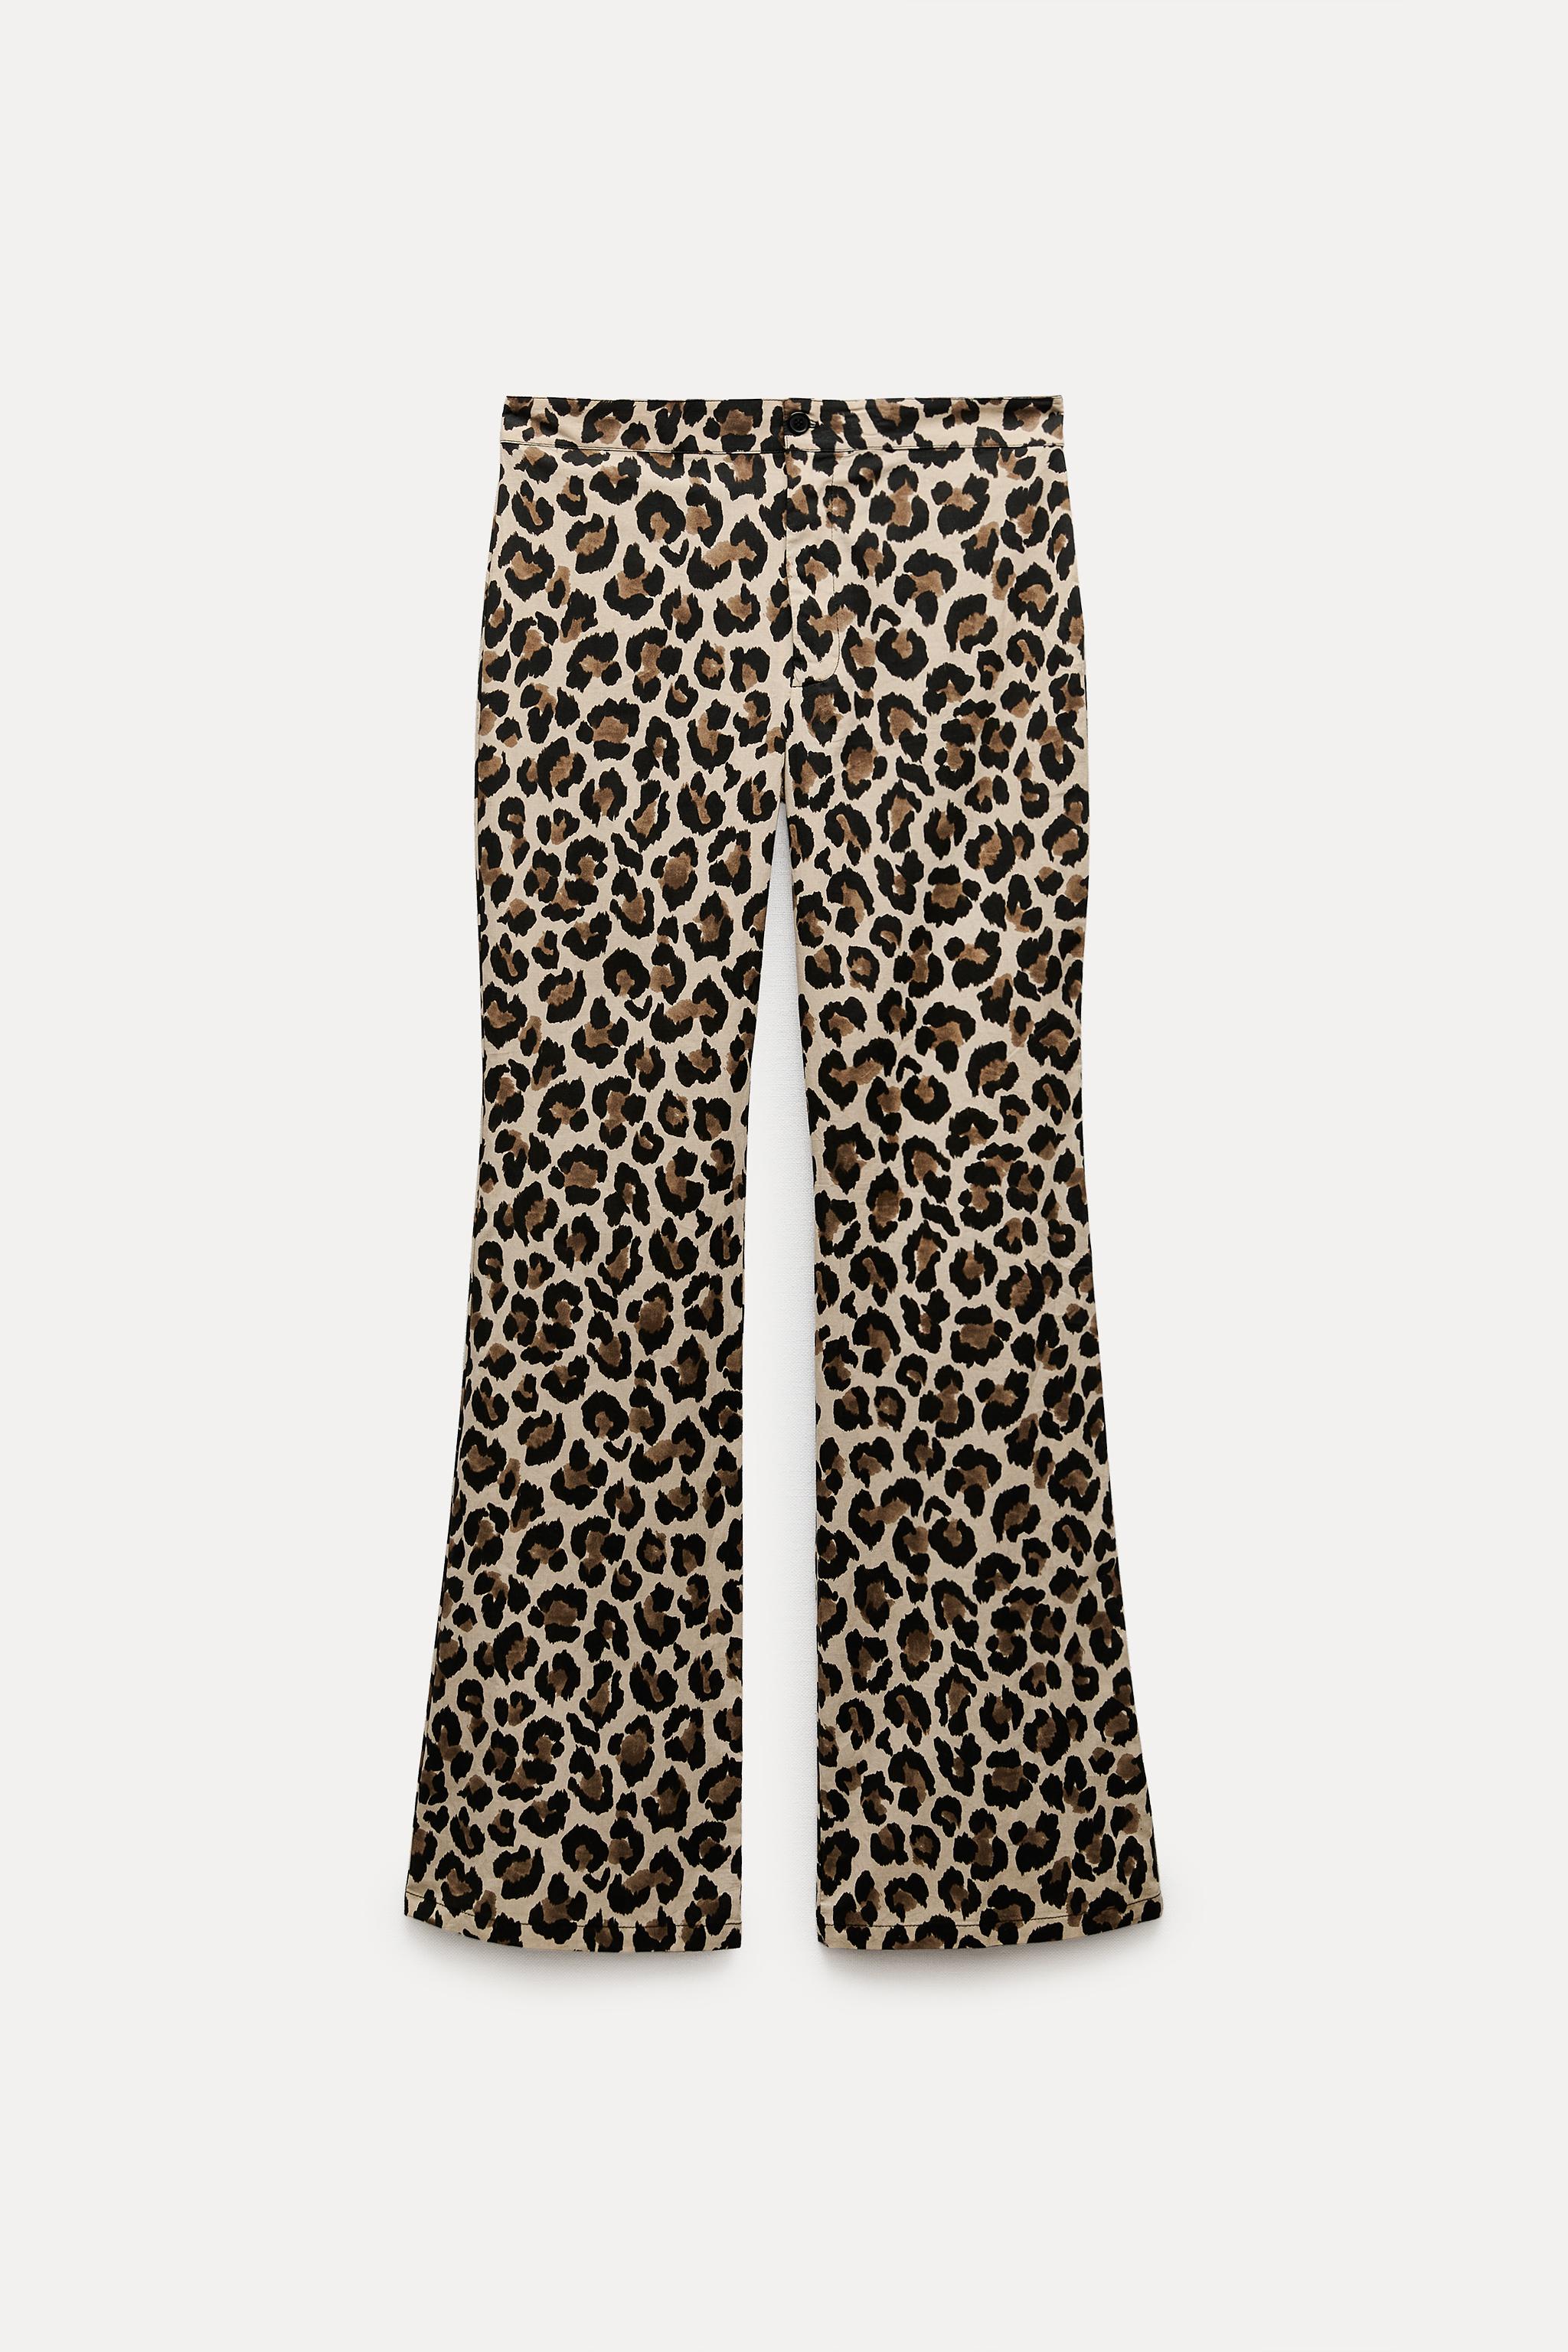 ZW COLLECTION ANIMAL PRINT TROUSERS - Leopard